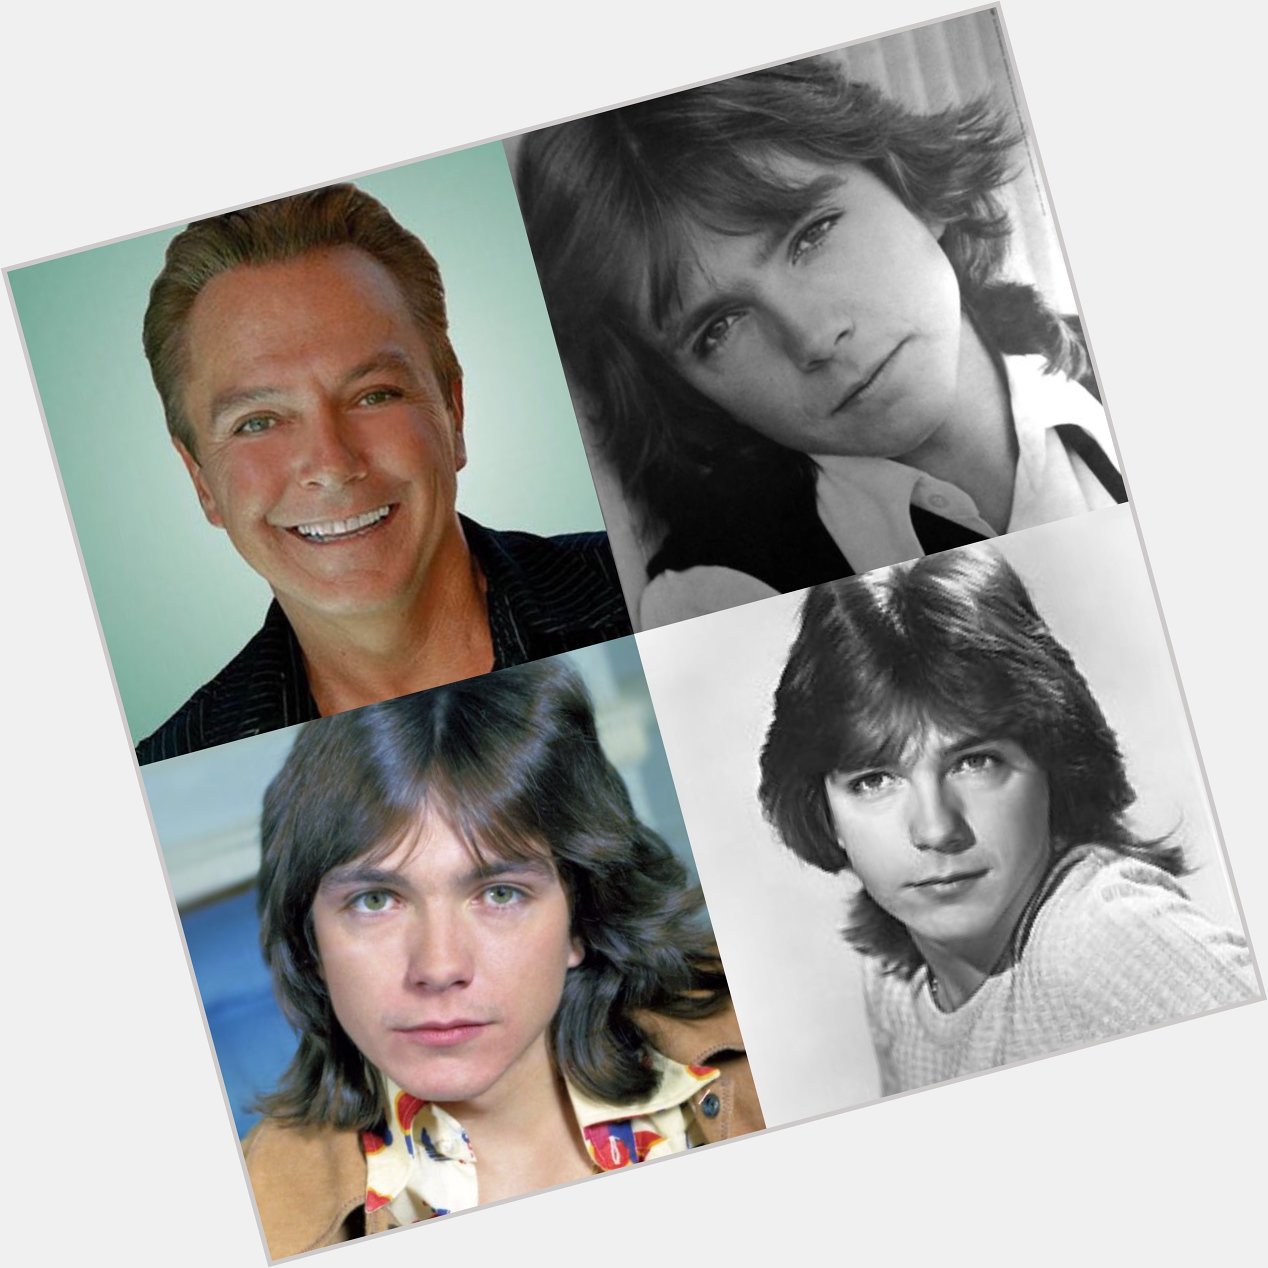 Happy 68 birthday to David Cassidy up in heaven. May he Rest In Peace.  